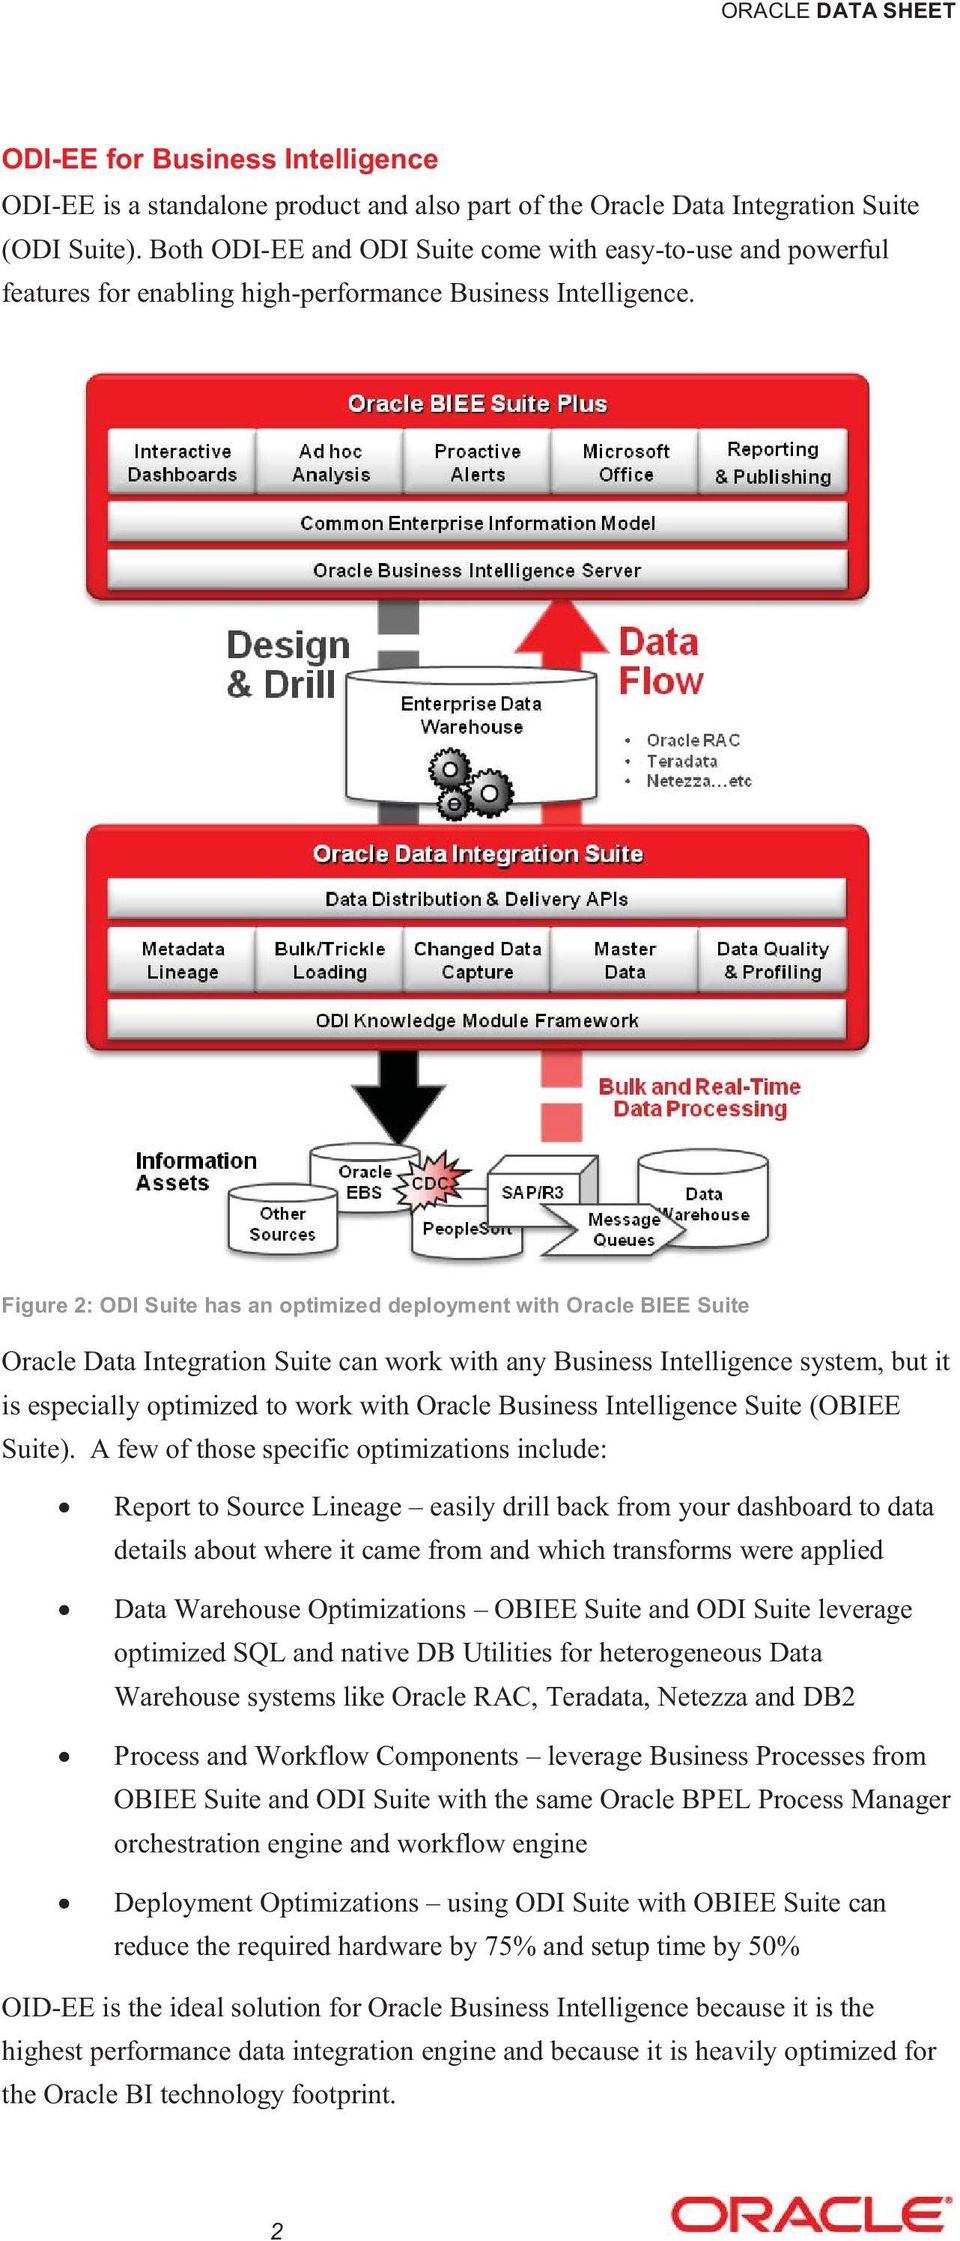 Figure 2: ODI Suite has an optimized deployment with Oracle BIEE Suite Oracle Data Integration Suite can work with any Business Intelligence system, but it is especially optimized to work with Oracle